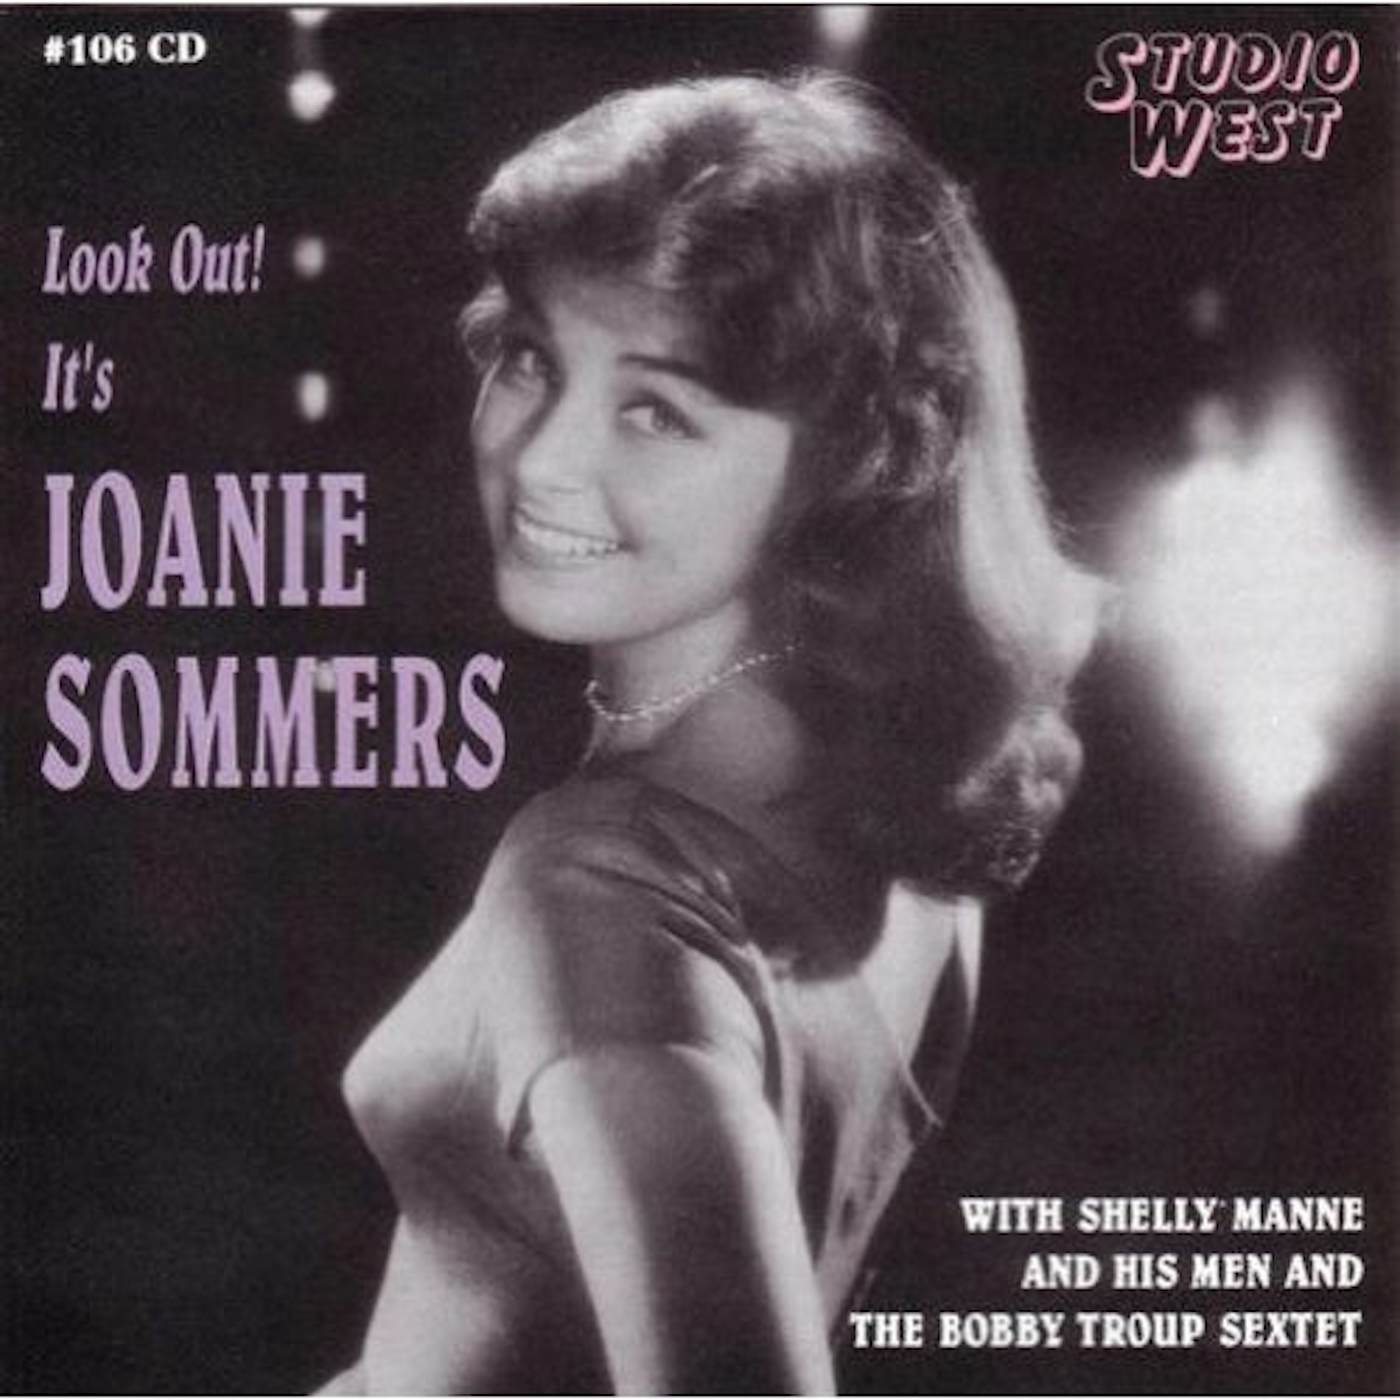 Joanie Sommers LOOK OUT IT'S JOANIE CD